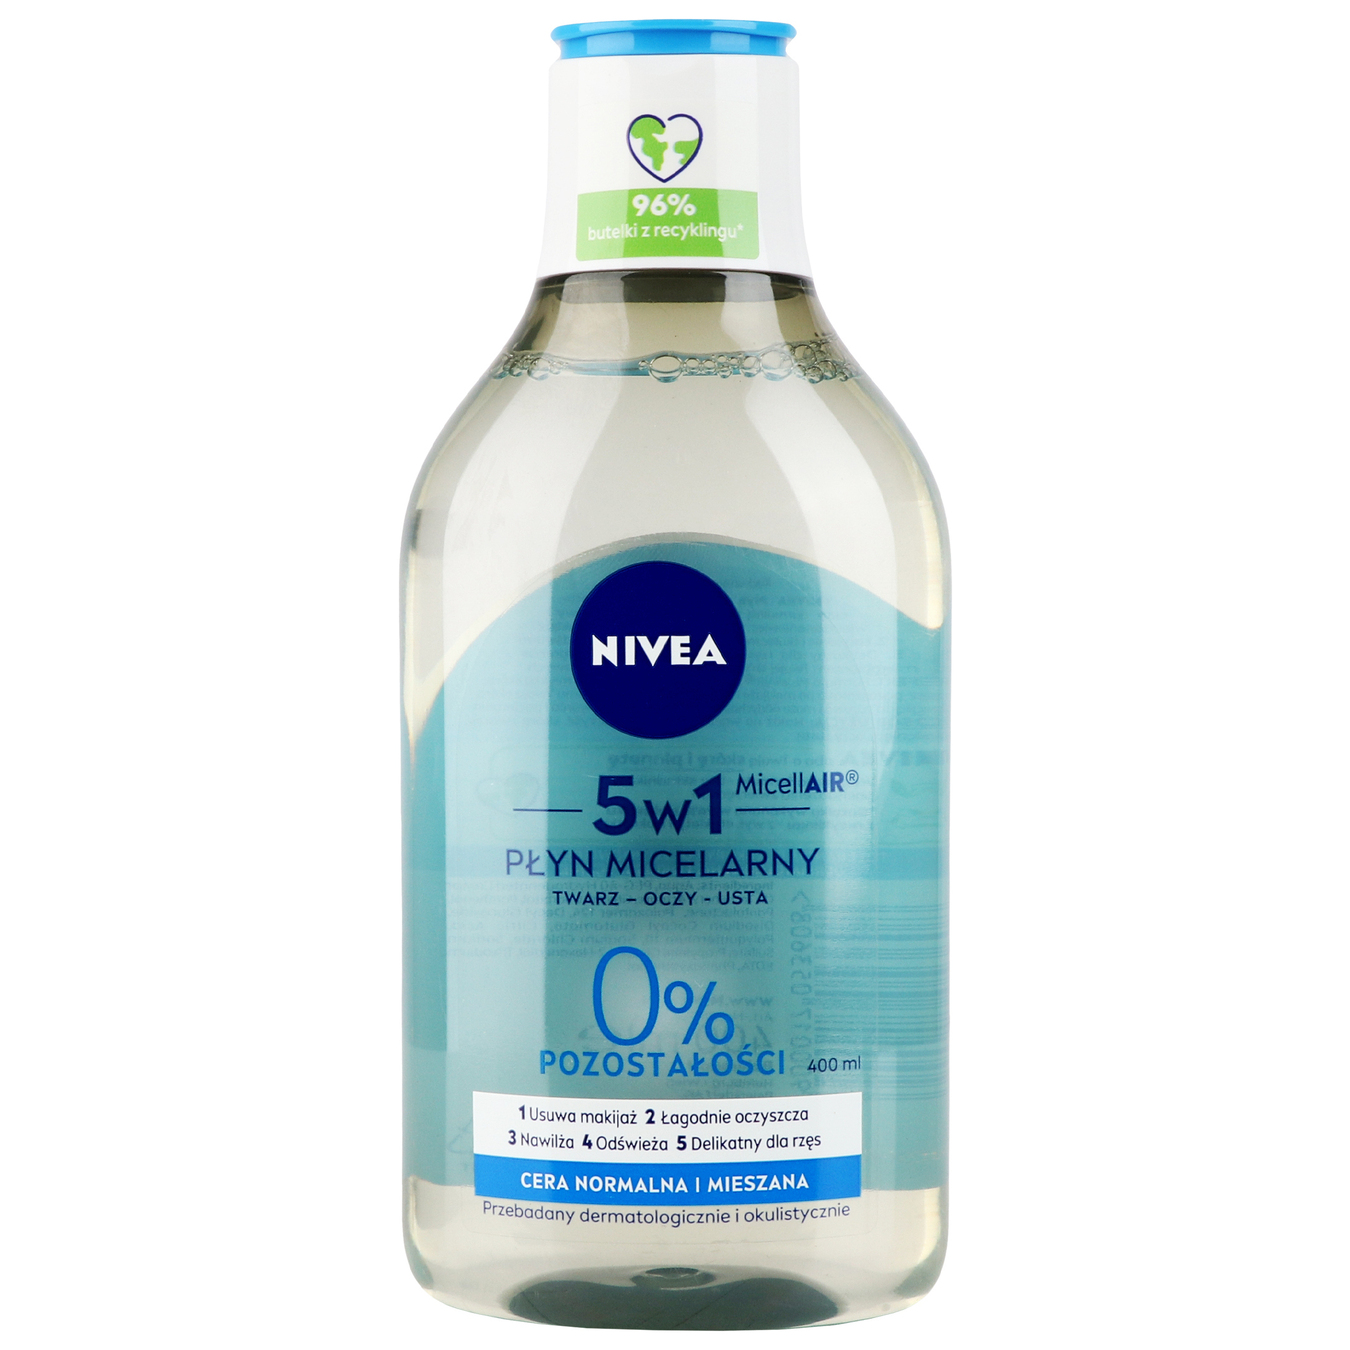 Nivea micellar water for removing make-up 3 in 1 400ml